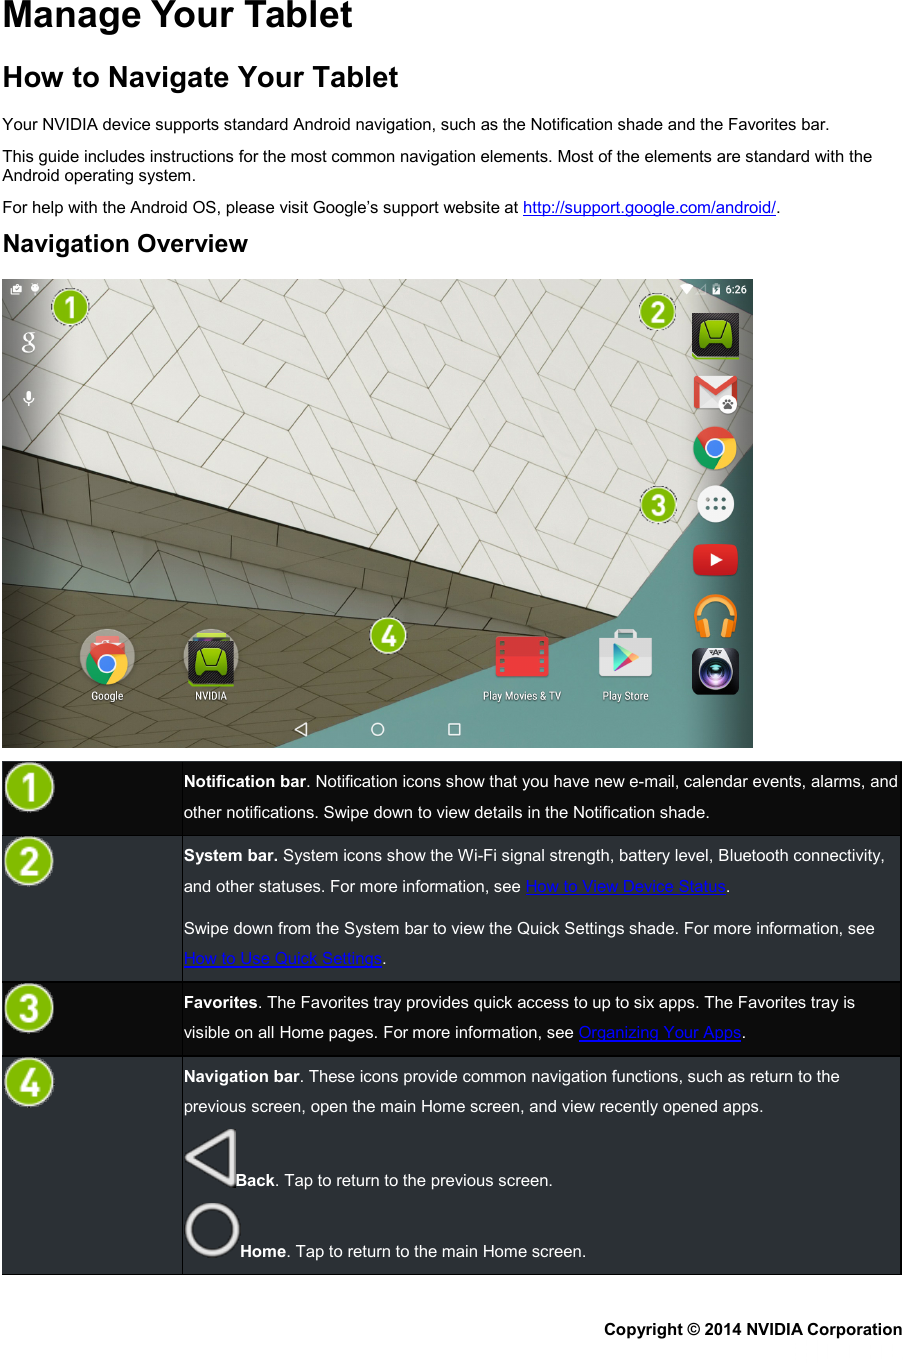 Manage Your Tablet How to Navigate Your Tablet Your NVIDIA device supports standard Android navigation, such as the Notification shade and the Favorites bar. This guide includes instructions for the most common navigation elements. Most of the elements are standard with the Android operating system. For help with the Android OS, please visit Google’s support website at http://support.google.com/android/. Navigation Overview   Notification bar. Notification icons show that you have new e-mail, calendar events, alarms, and other notifications. Swipe down to view details in the Notification shade.  System bar. System icons show the Wi-Fi signal strength, battery level, Bluetooth connectivity, and other statuses. For more information, see How to View Device Status. Swipe down from the System bar to view the Quick Settings shade. For more information, see How to Use Quick Settings.  Favorites. The Favorites tray provides quick access to up to six apps. The Favorites tray is visible on all Home pages. For more information, see Organizing Your Apps.  Navigation bar. These icons provide common navigation functions, such as return to the previous screen, open the main Home screen, and view recently opened apps. Back. Tap to return to the previous screen. Home. Tap to return to the main Home screen. Copyright © 2014 NVIDIA Corporation   